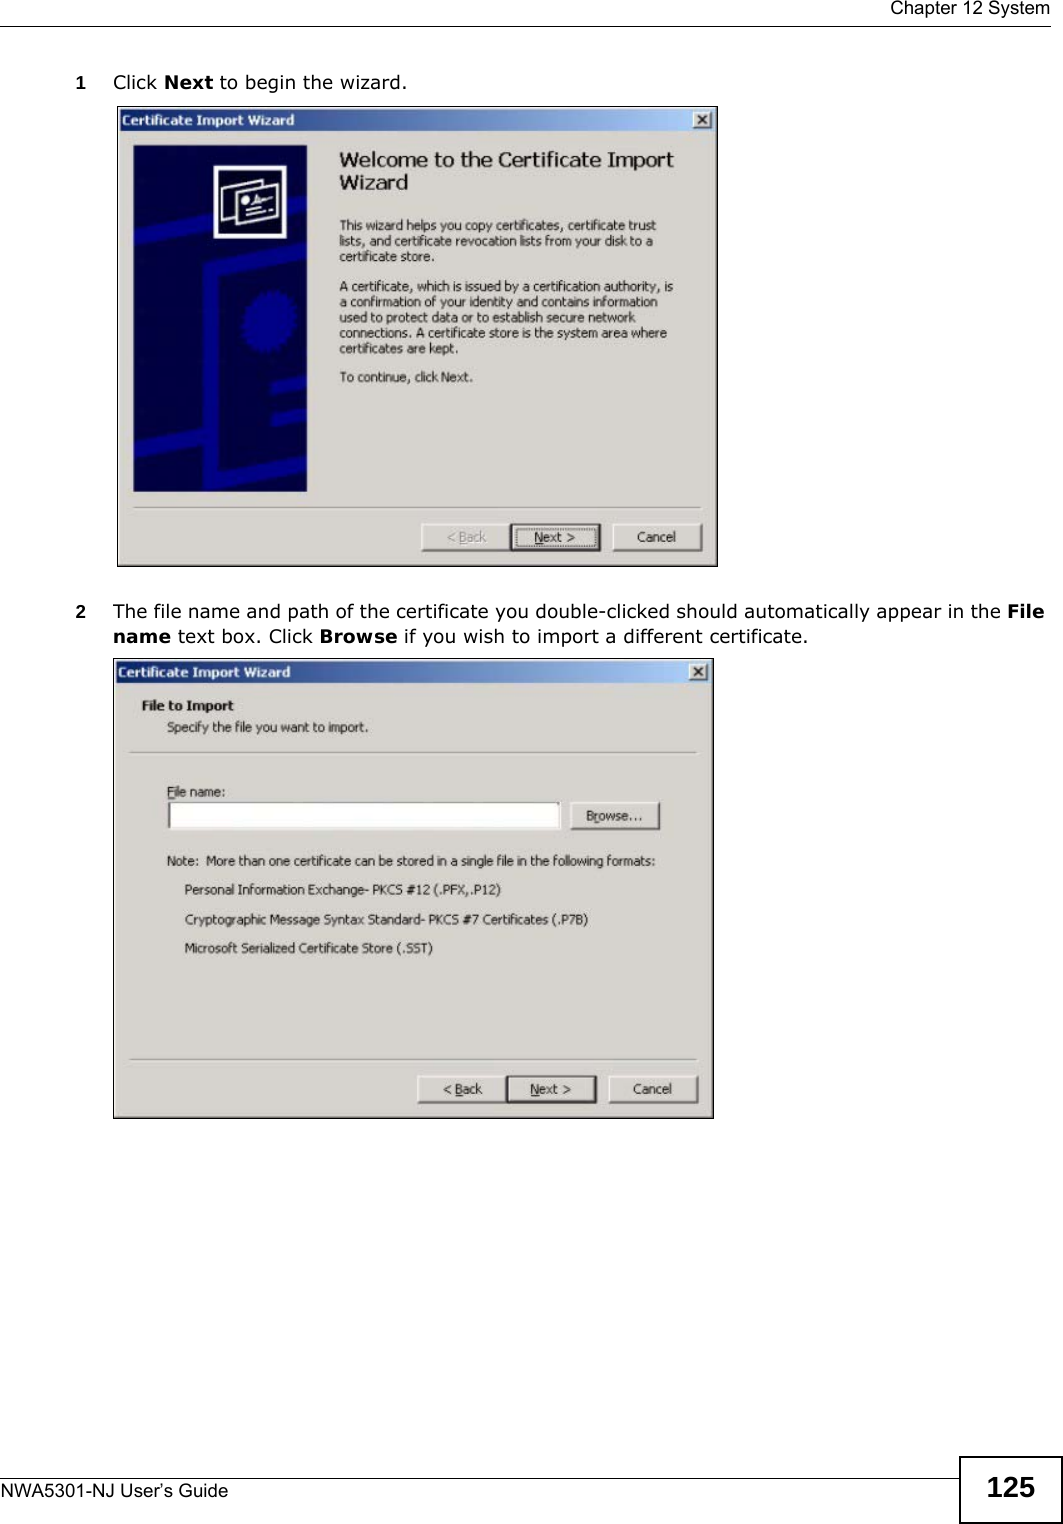  Chapter 12 SystemNWA5301-NJ User’s Guide 1251Click Next to begin the wizard.2The file name and path of the certificate you double-clicked should automatically appear in the File name text box. Click Browse if you wish to import a different certificate.